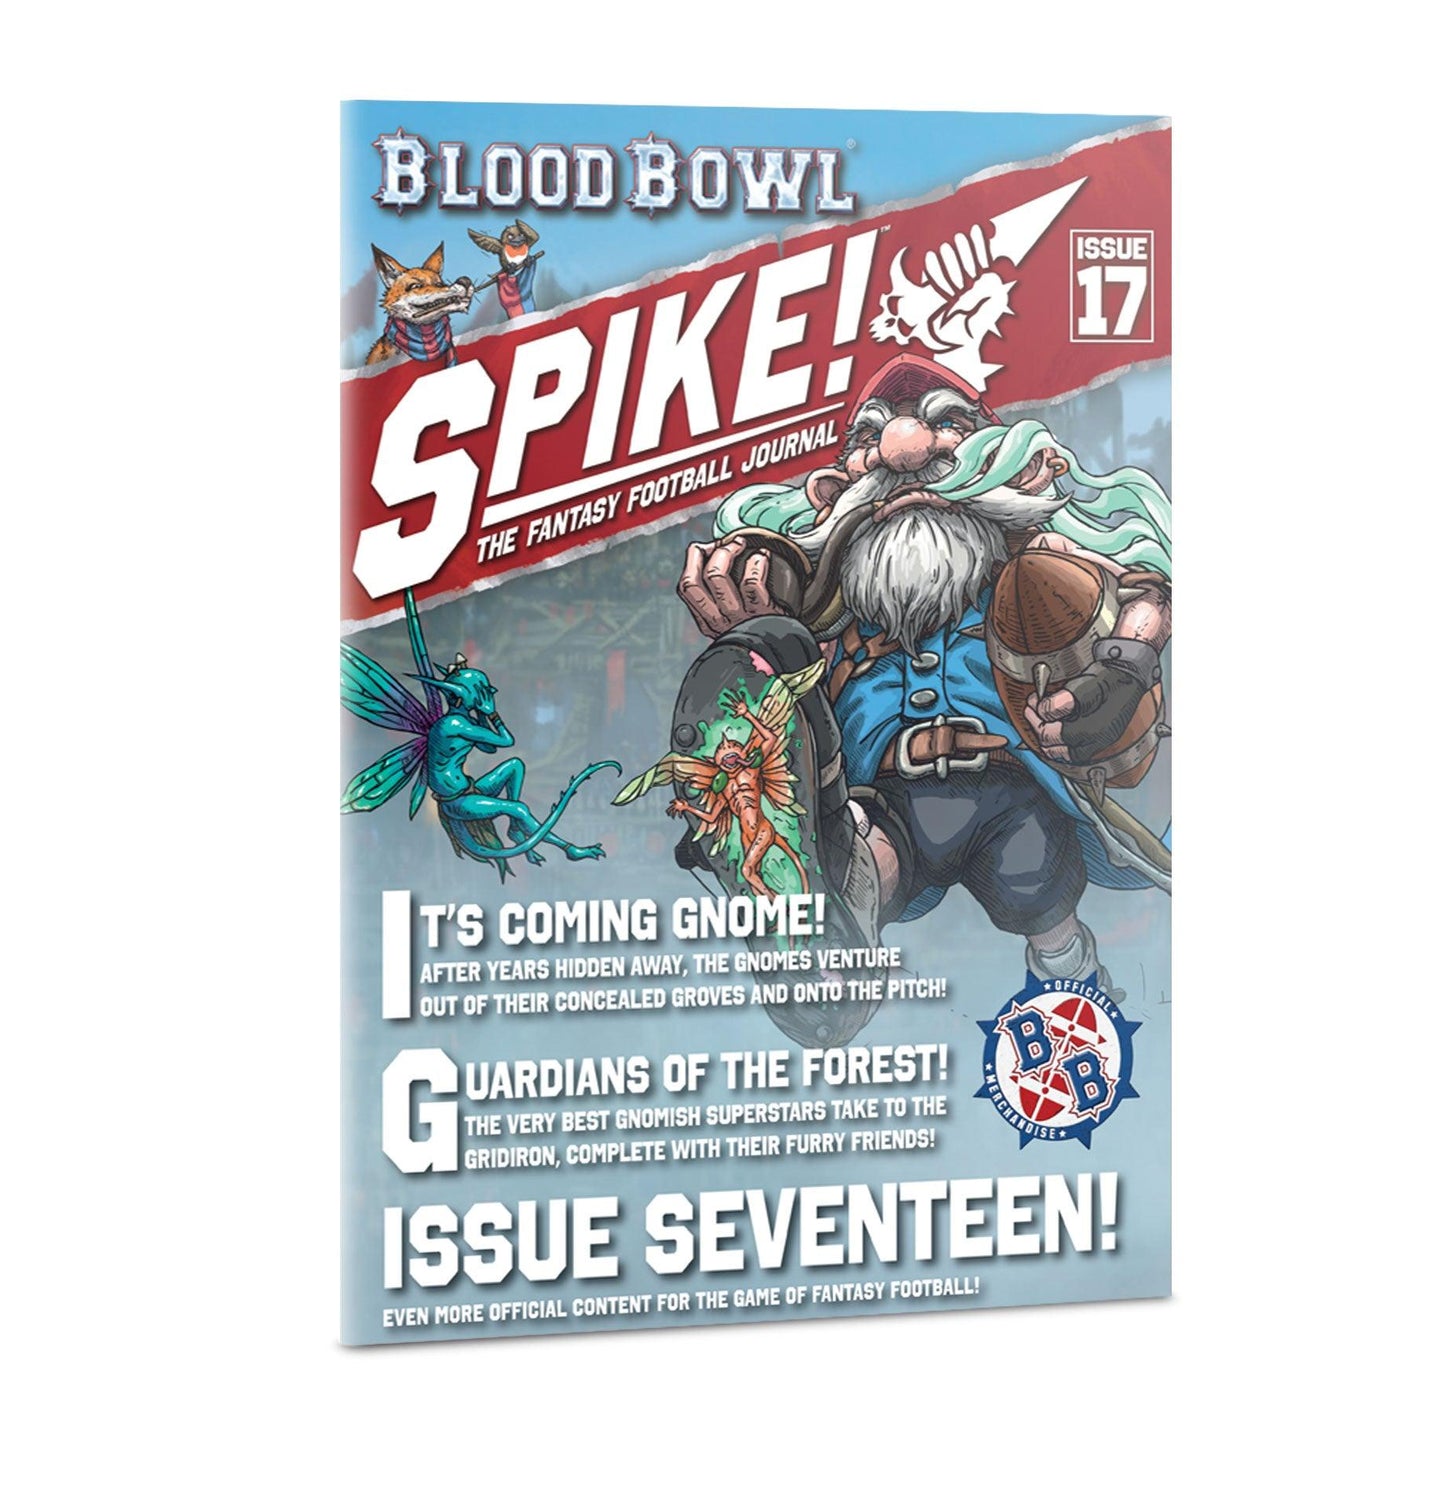 BLOOD BOWL: SPIKE! JOURNAL ISSUE 17 - ZZGames.dk